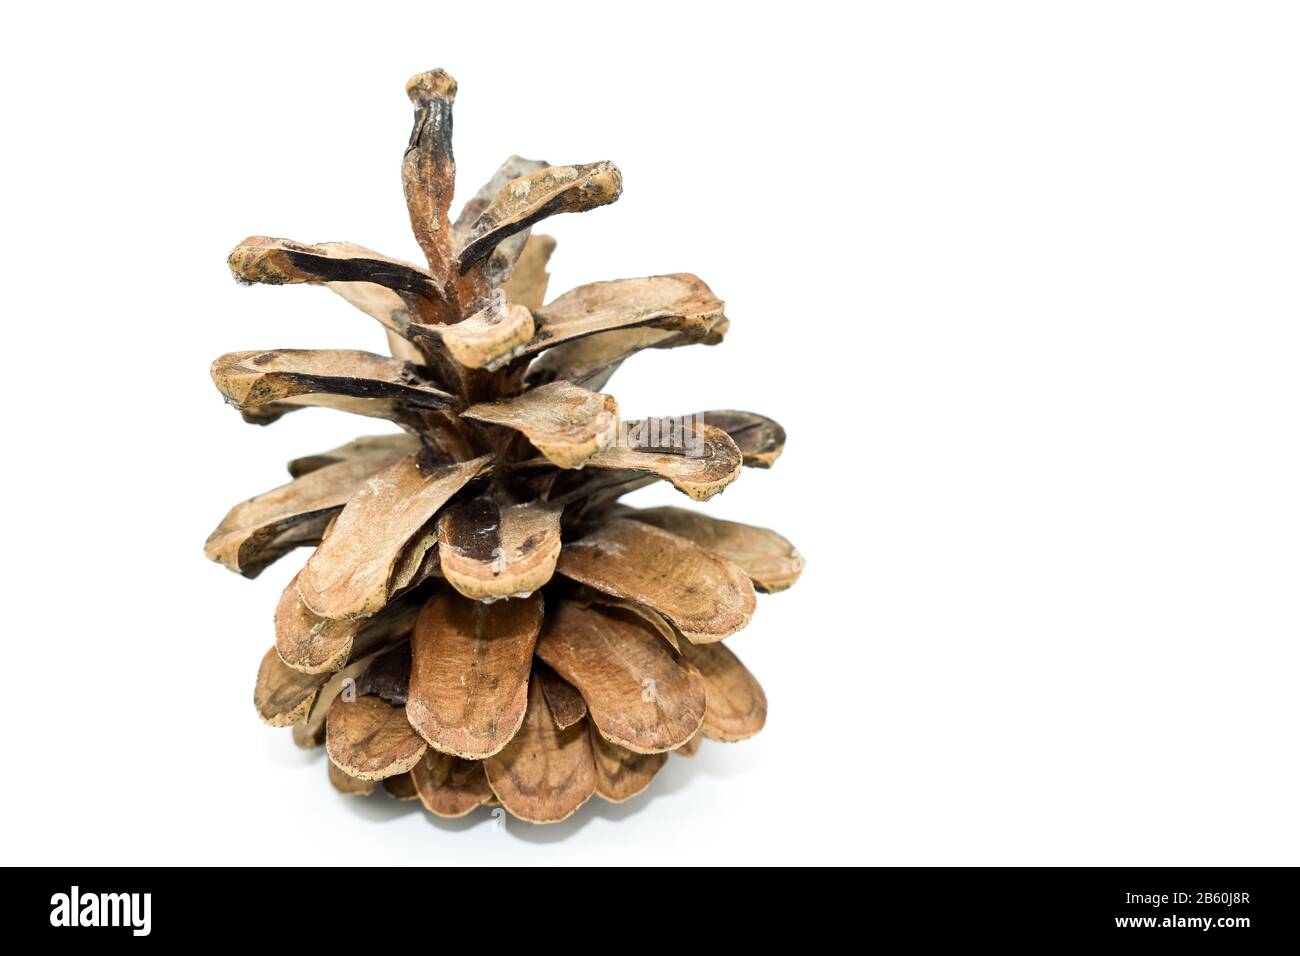 pine cone isolated on white background. organ on plants of the division Pinophyta (conifers) that contains the reproductive structures.Christmas decor Stock Photo